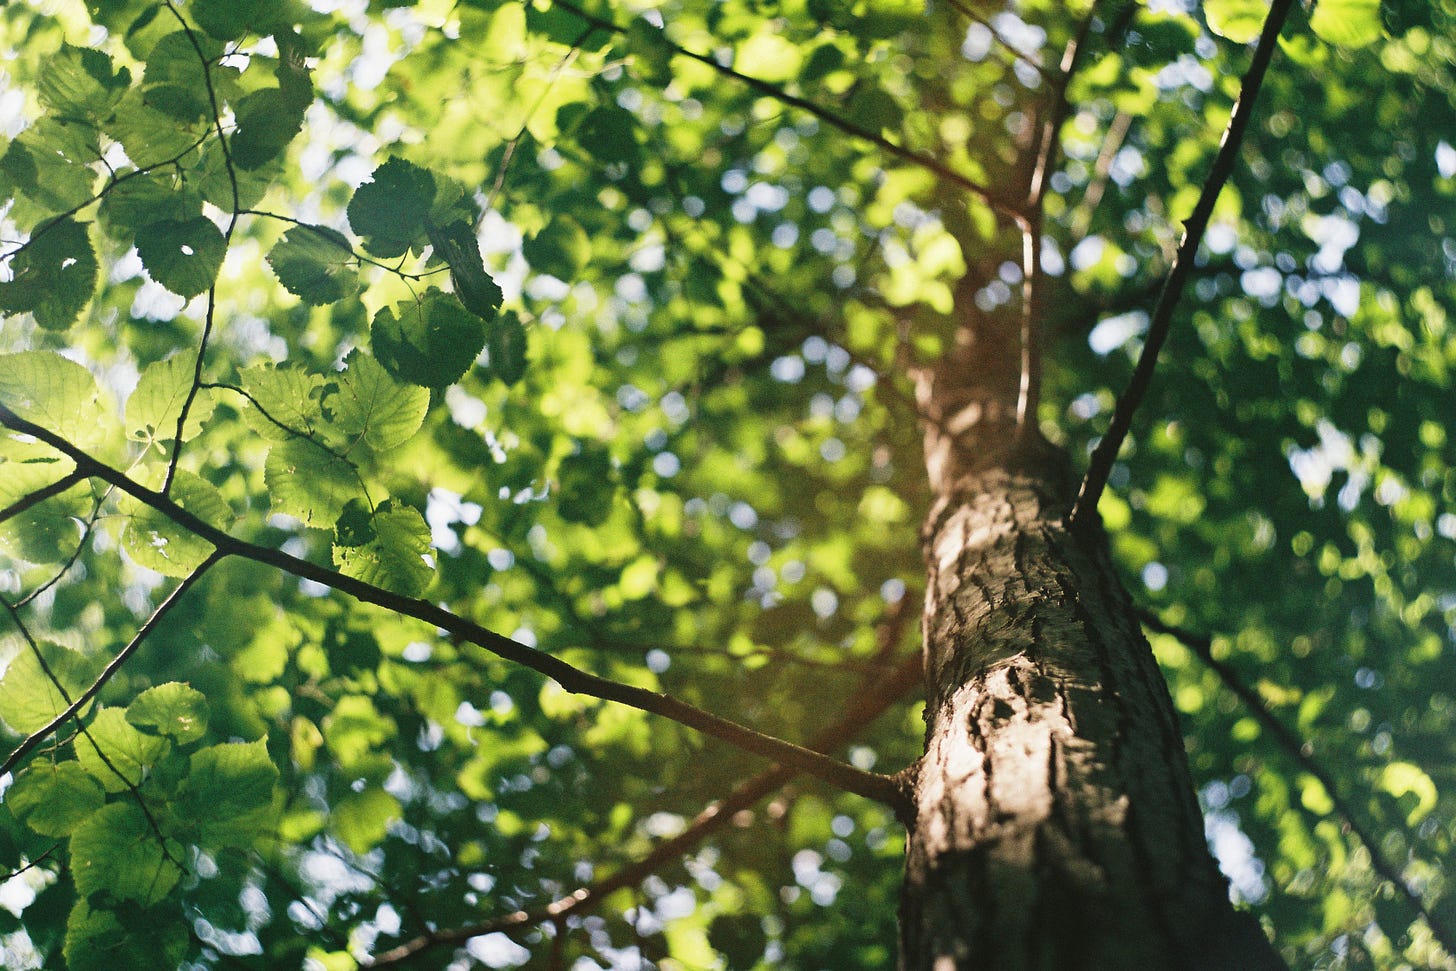 photo of a tree with bright green leaves in the summer time. photo taken looking up along the trunk. sunlight hits the trunk in several patterned bright spots. tree leaves are dappled all different colours of green from bright to dark as sunlight hits them in different amounts.